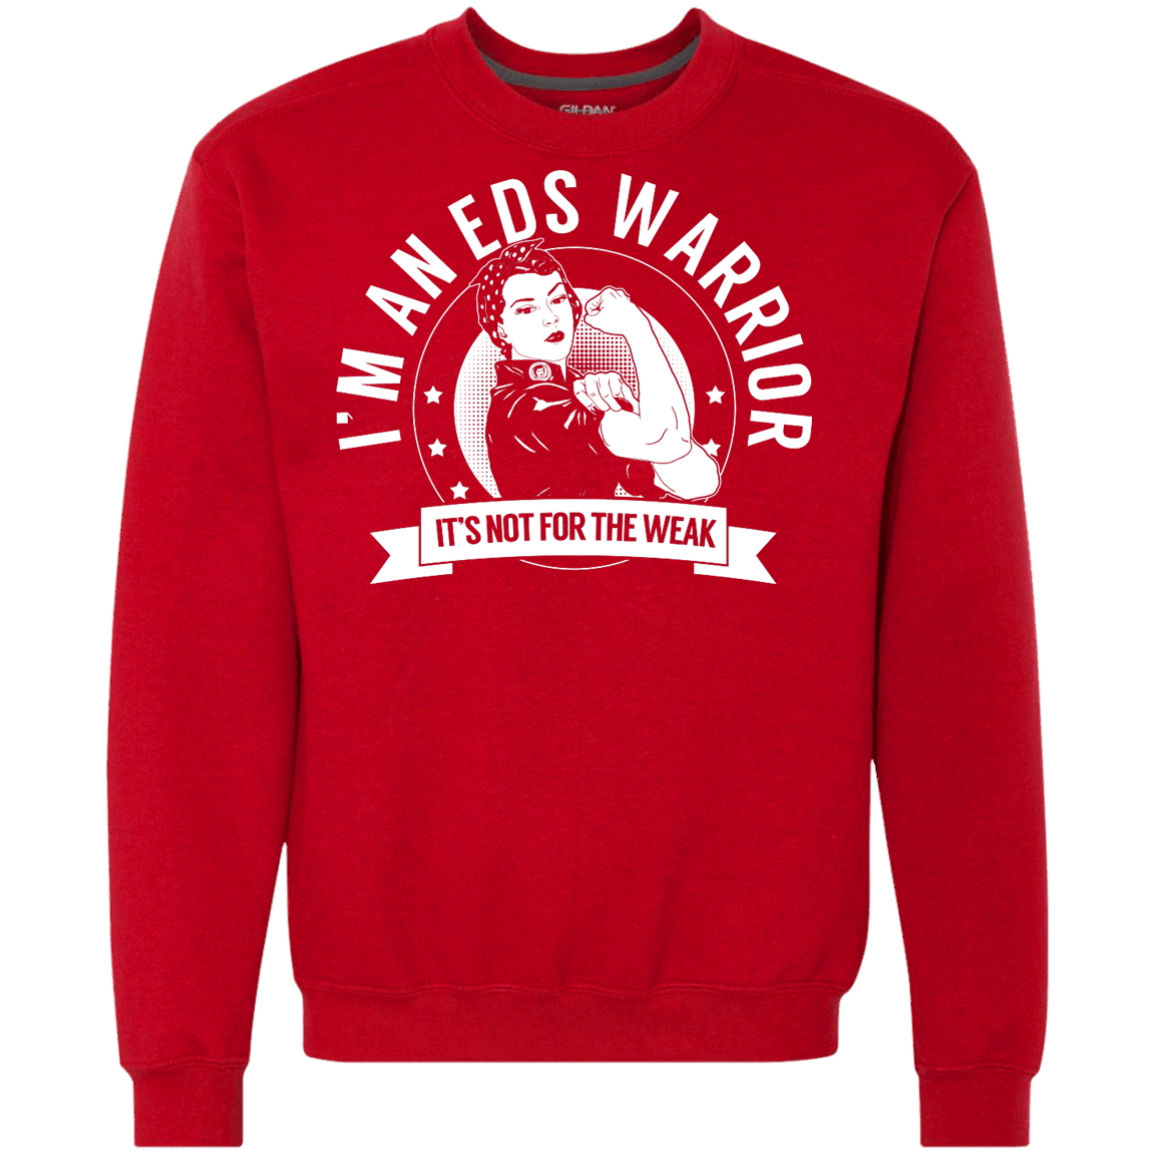 Ehlers Danlos Syndrome - EDS Warrior Not for the Weak Crewneck Sweatshirt 9 oz. - The Unchargeables